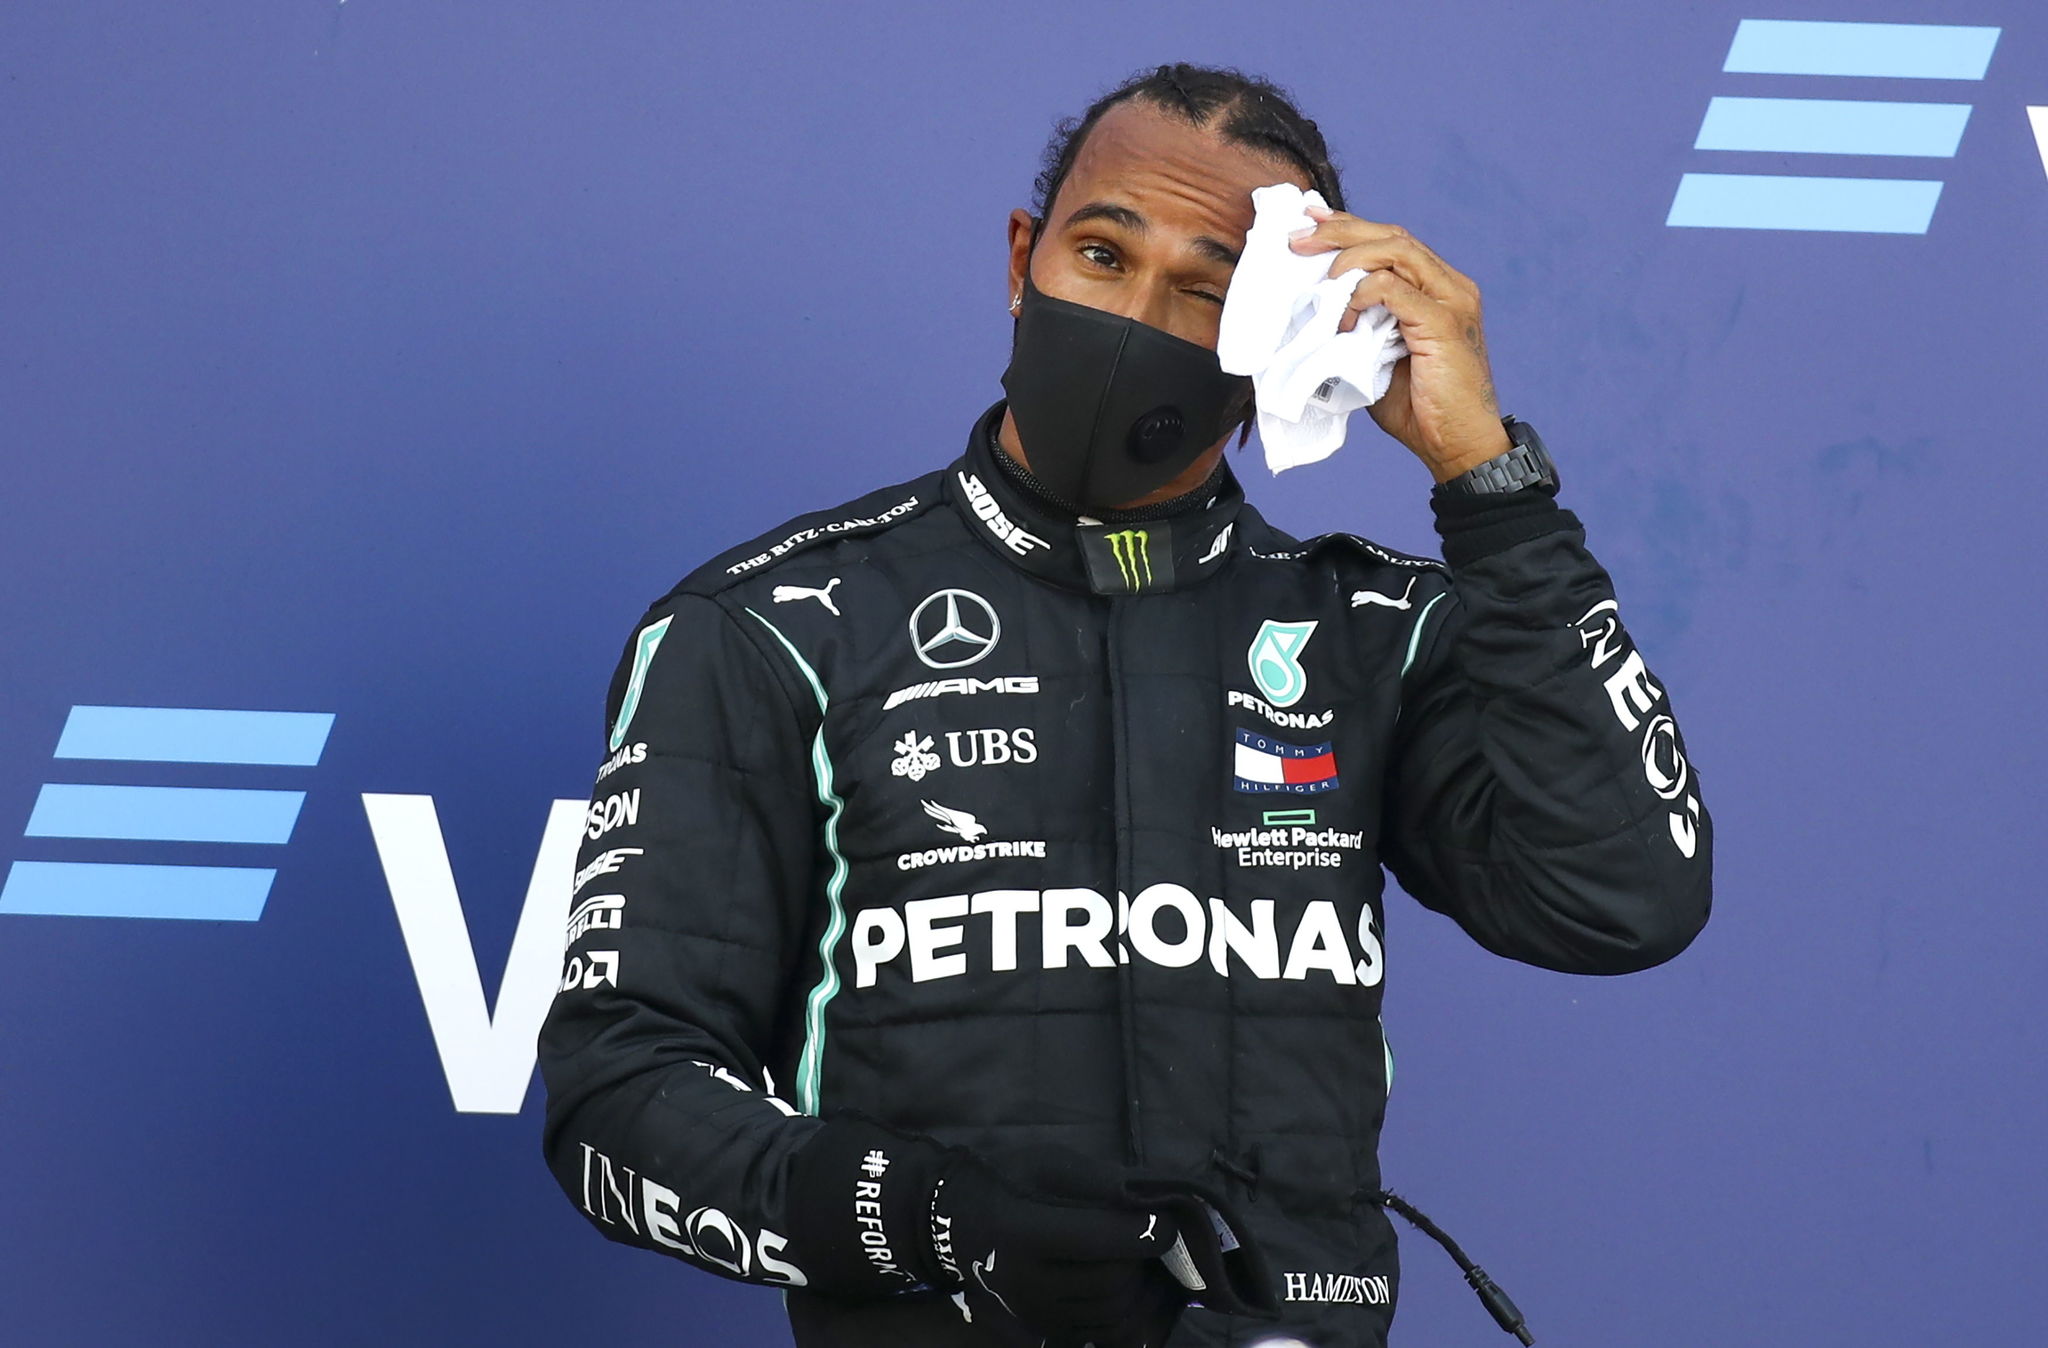 Sochi (Russian Federation), 27/09/2020.- British Formula One driver Lewis lt;HIT gt;Hamilton lt;/HIT gt; of Mercedes-AMG Petronas reacts on the podium after taking the third place in the Formula One Grand Prix of Russia at the race track in Sochi, Russia, 27 September 2020. (Frmula Uno, Rusia) EFE/EPA/Bryn Lennon / Pool